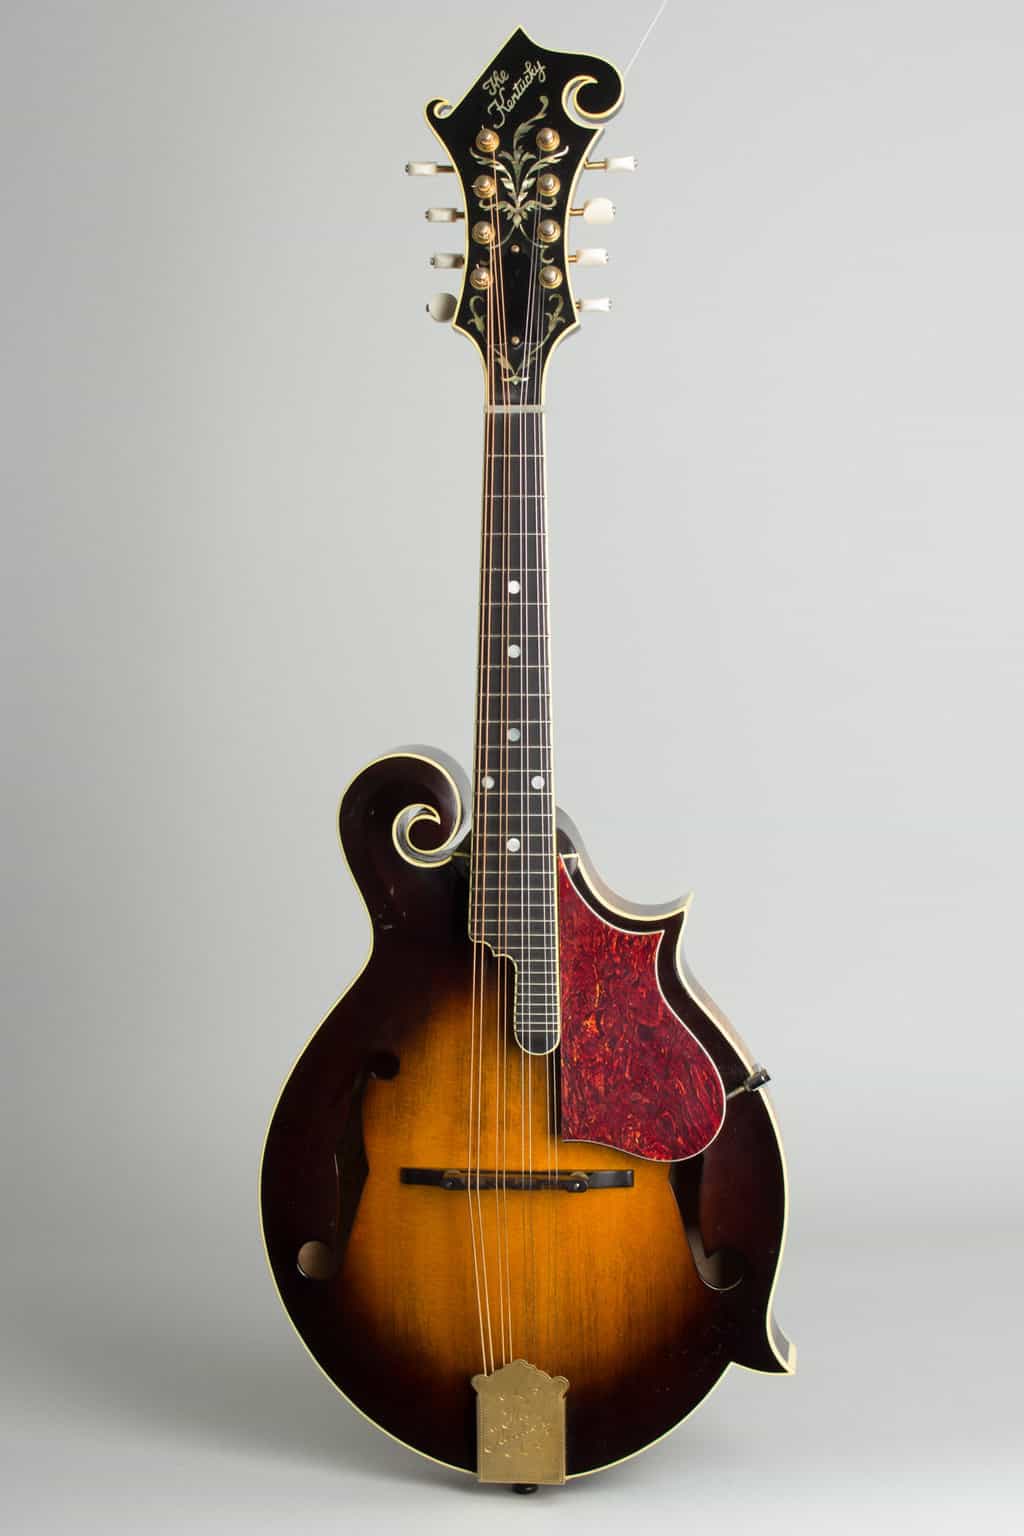 Where Are Kentucky Mandolins Manufactured?